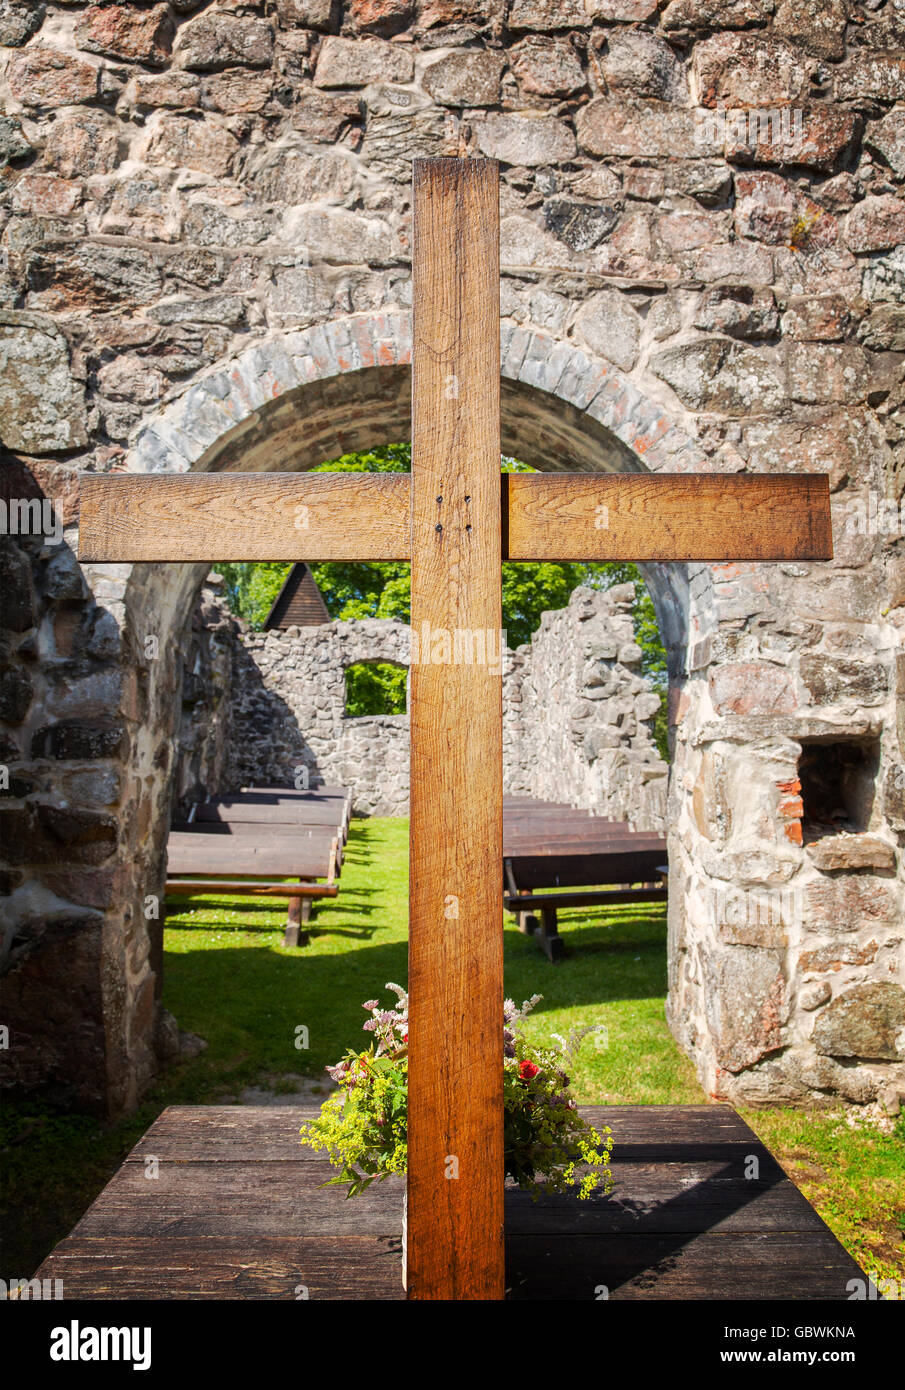 Image of the outdoor altar at Rya church ruin, Sweden. Stock Photo